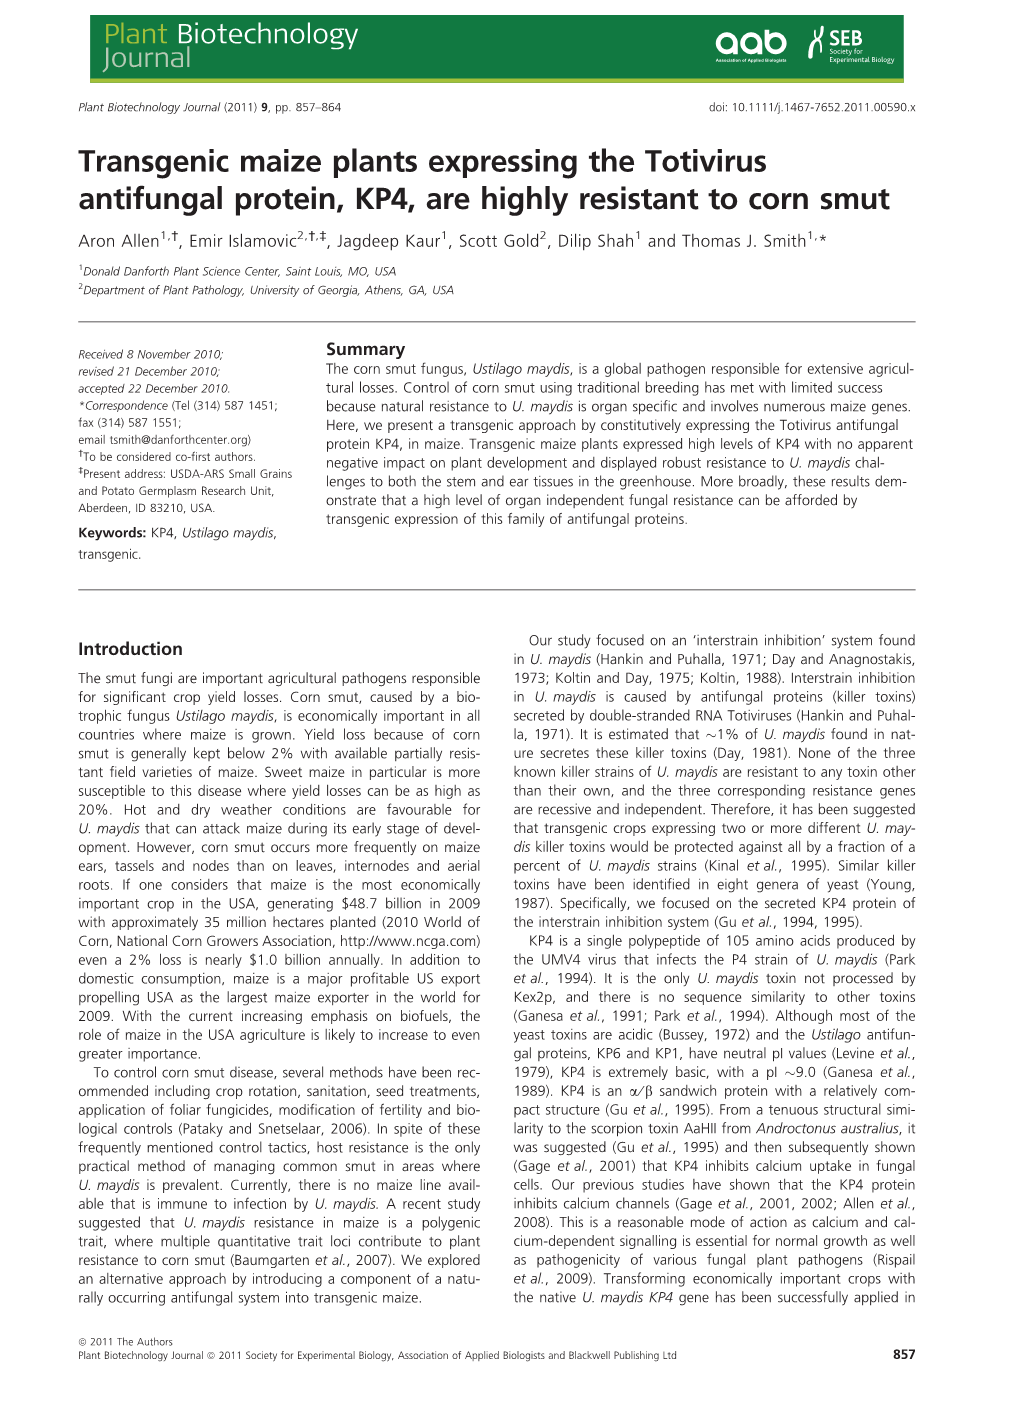 Transgenic Maize Plants Expressing the Totivirus Antifungal Protein, KP4, Are Highly Resistant to Corn Smut